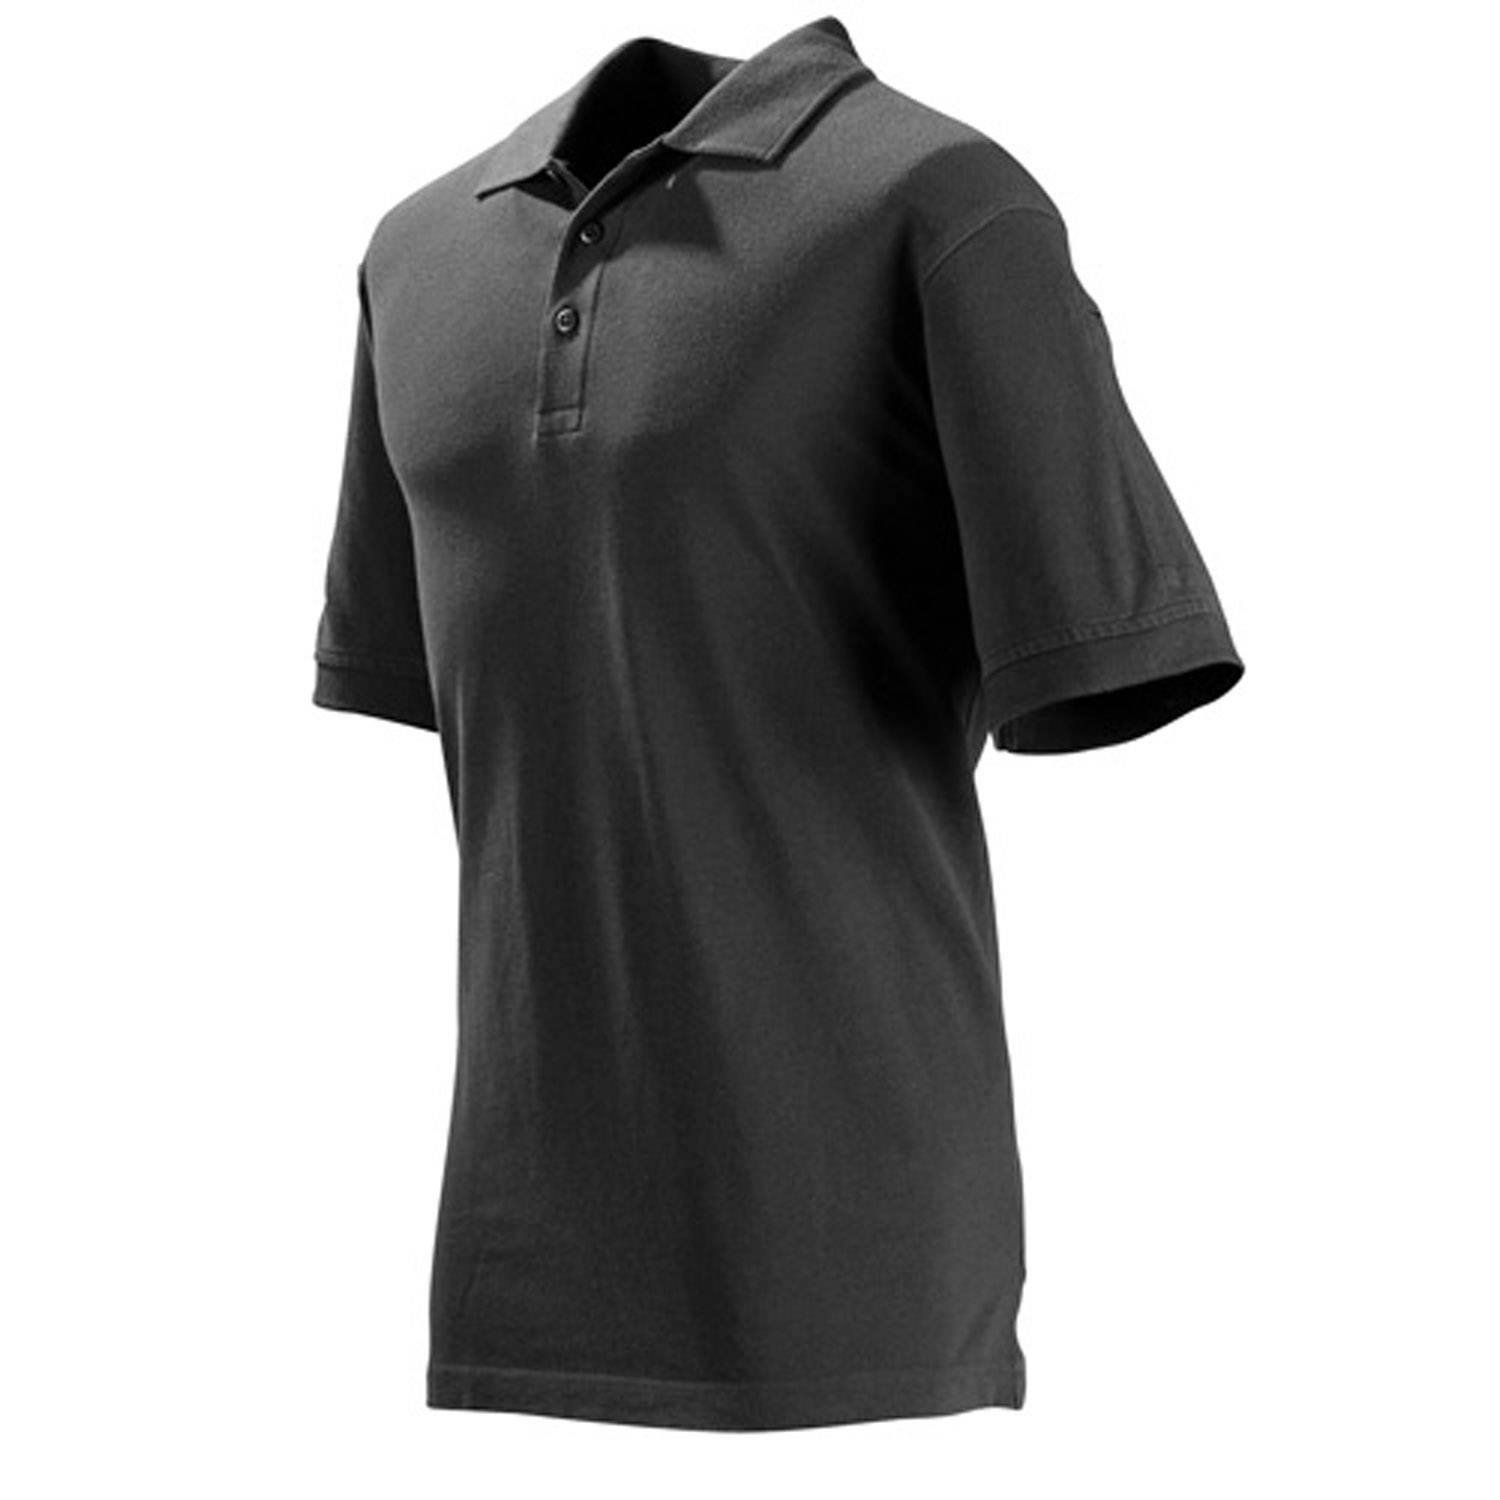 5.11 TACTICAL MEN'S PROFESSIONAL SHORT SLEEVE POLO